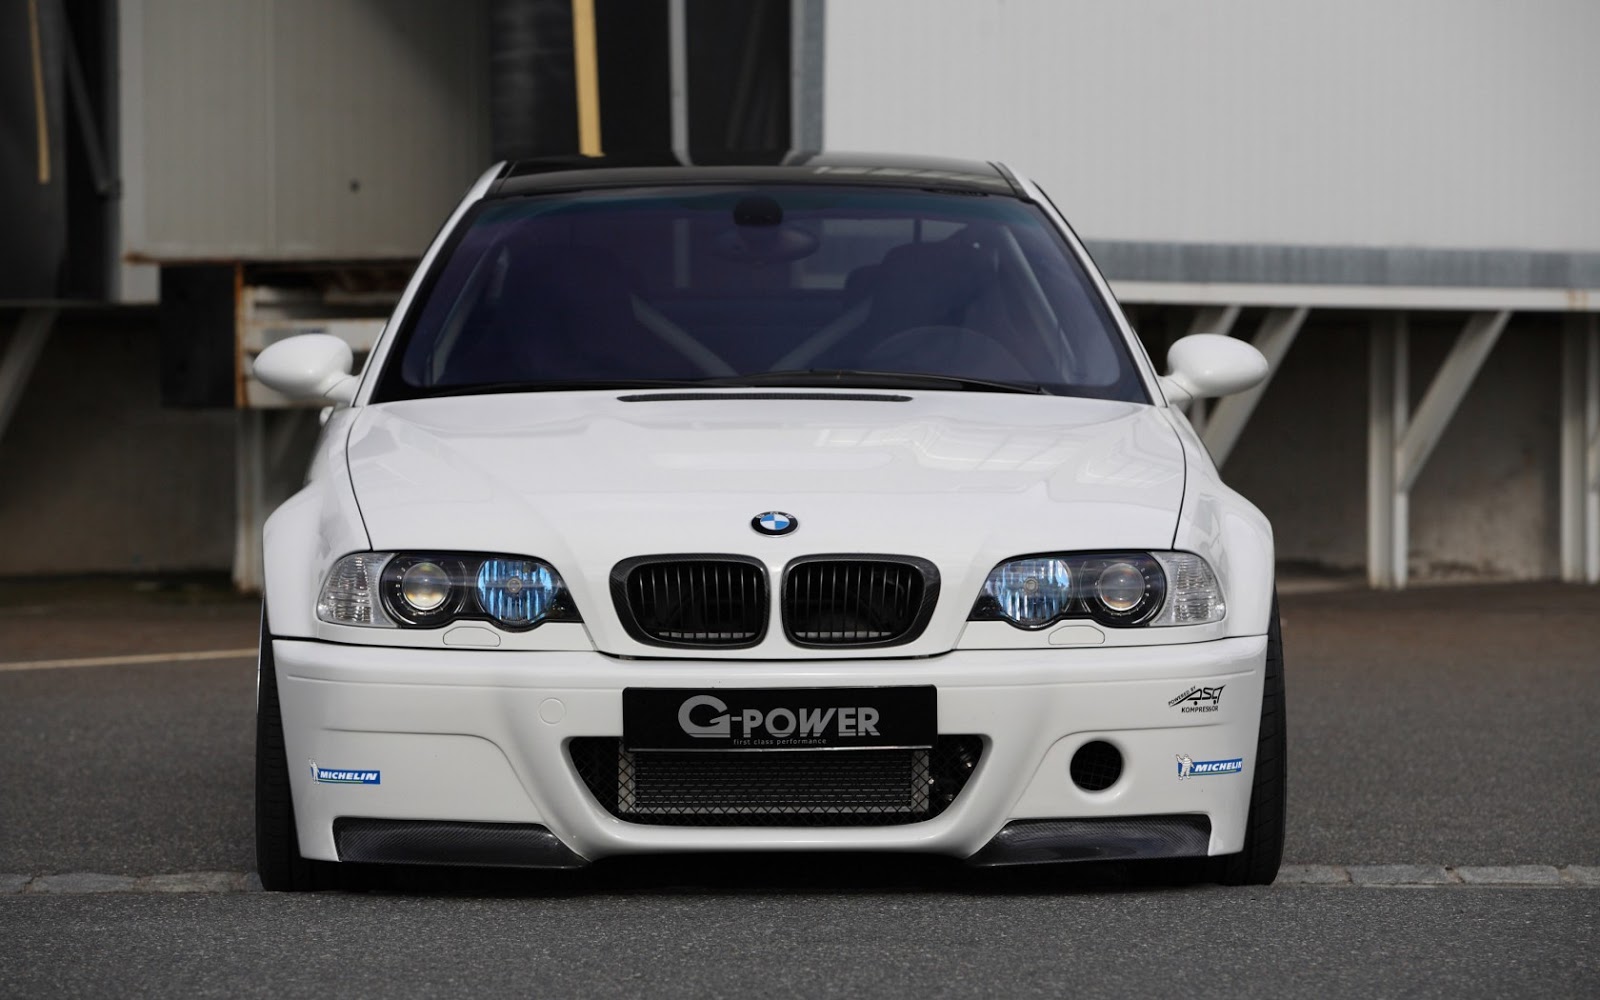 BMW Wallpaper 1920x1080 View Front Side Cars Wallpapers HD